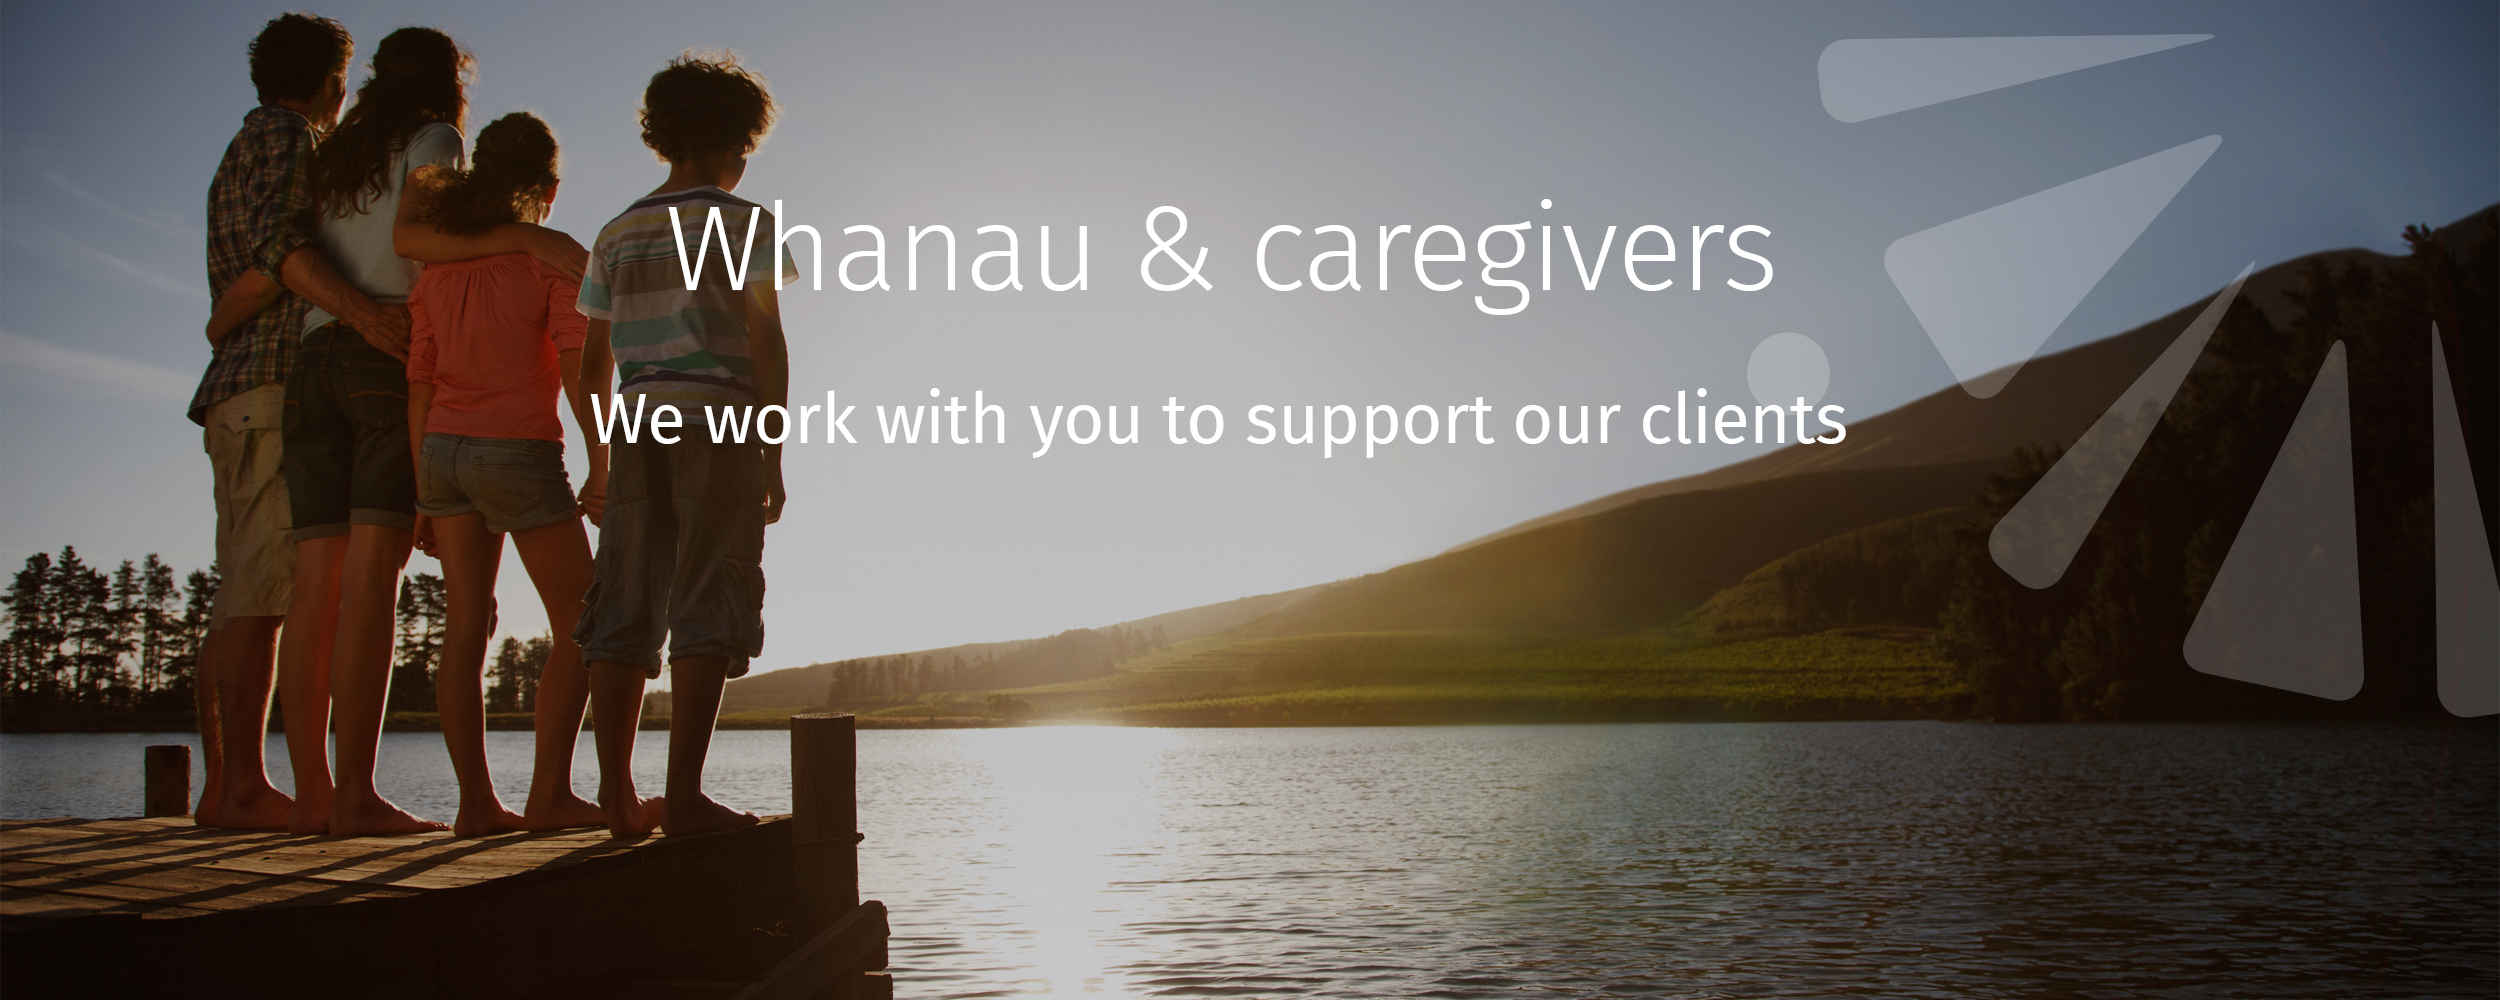 We work with you to support our clients